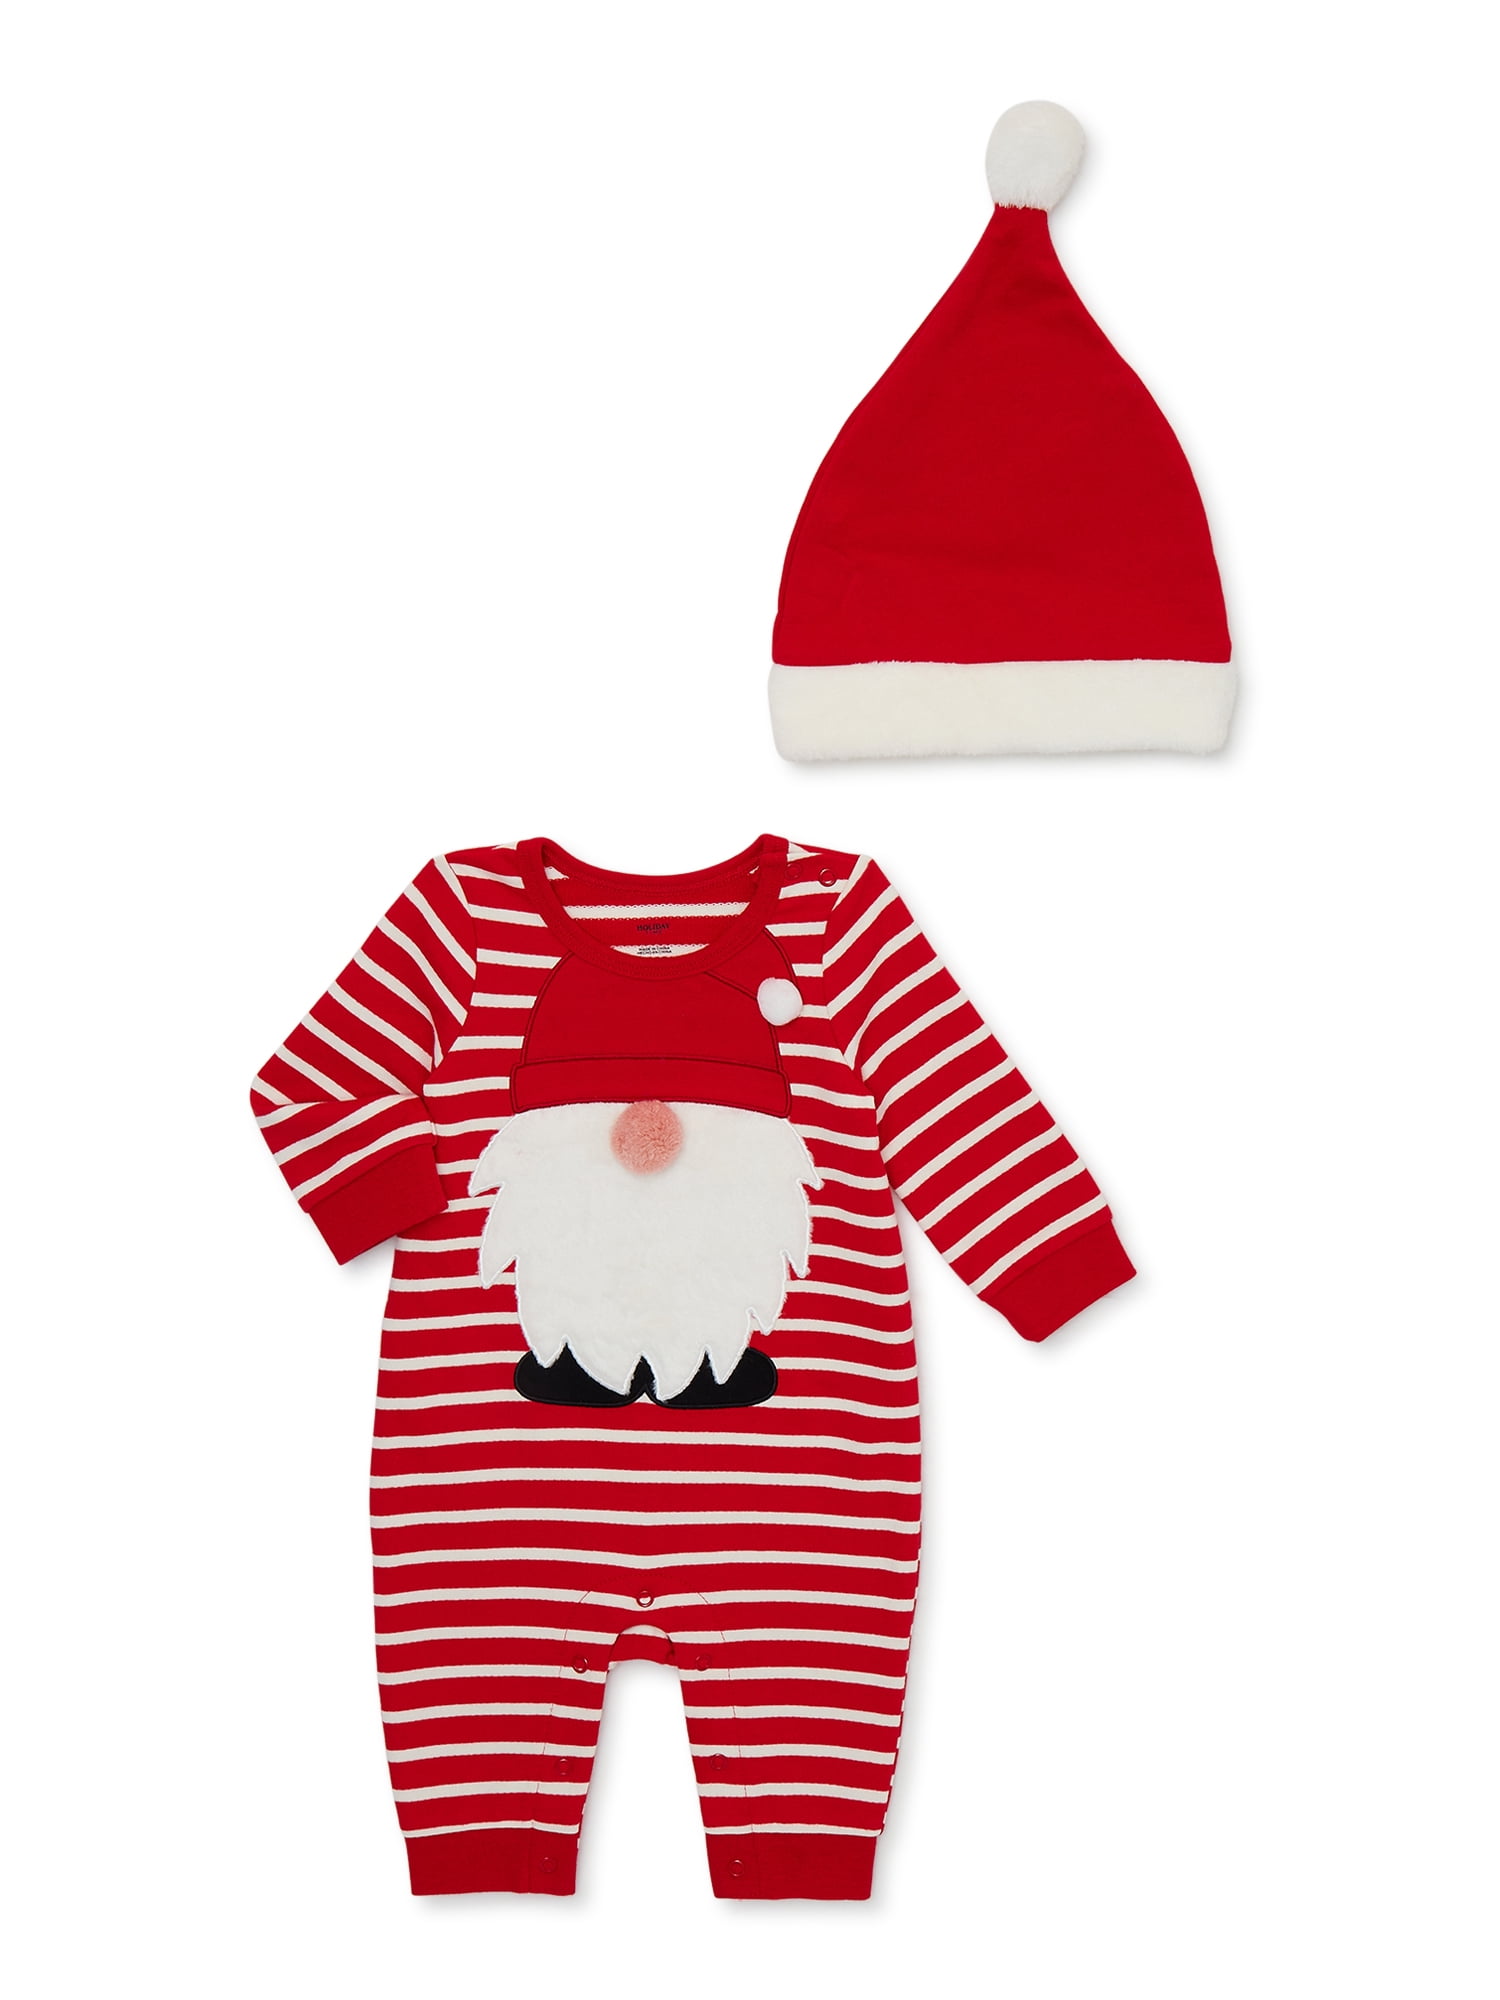 Baby Boy Girl Newborn First Christmas Clothe Romper Pant Hat Outfit  4Xpieces Set